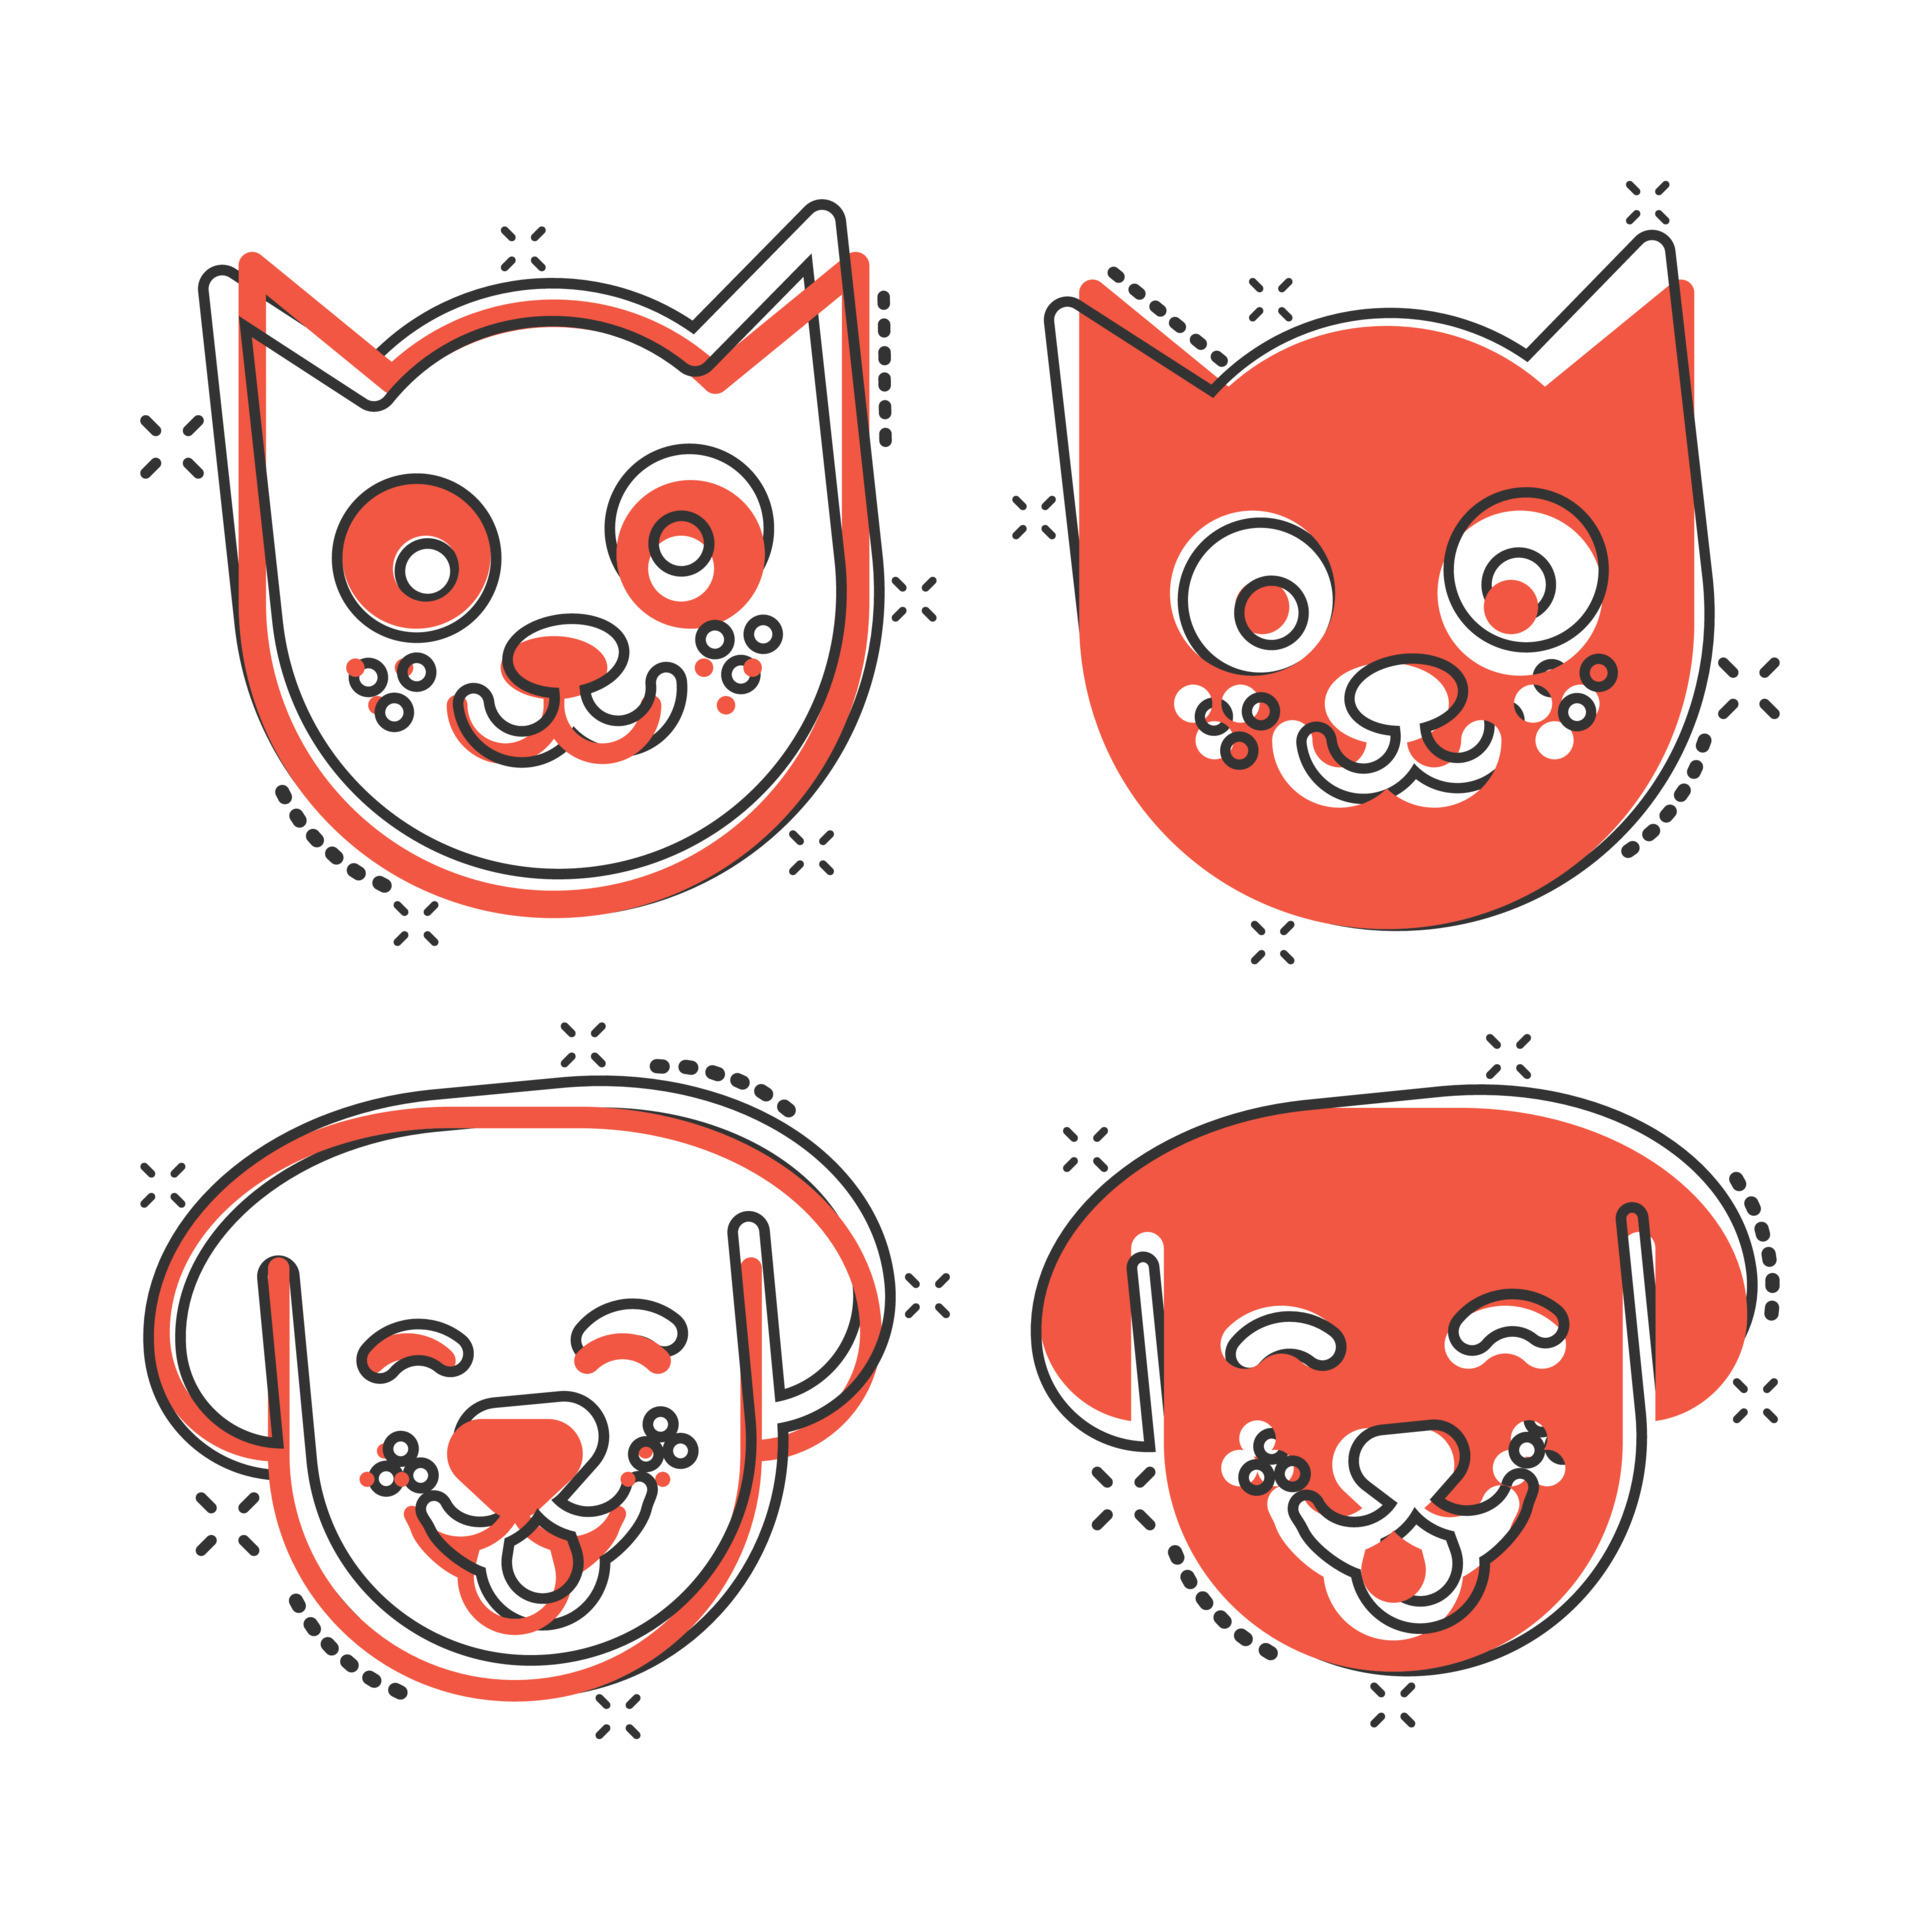 Dog and cat icon in comic style. Animal head cartoon vector